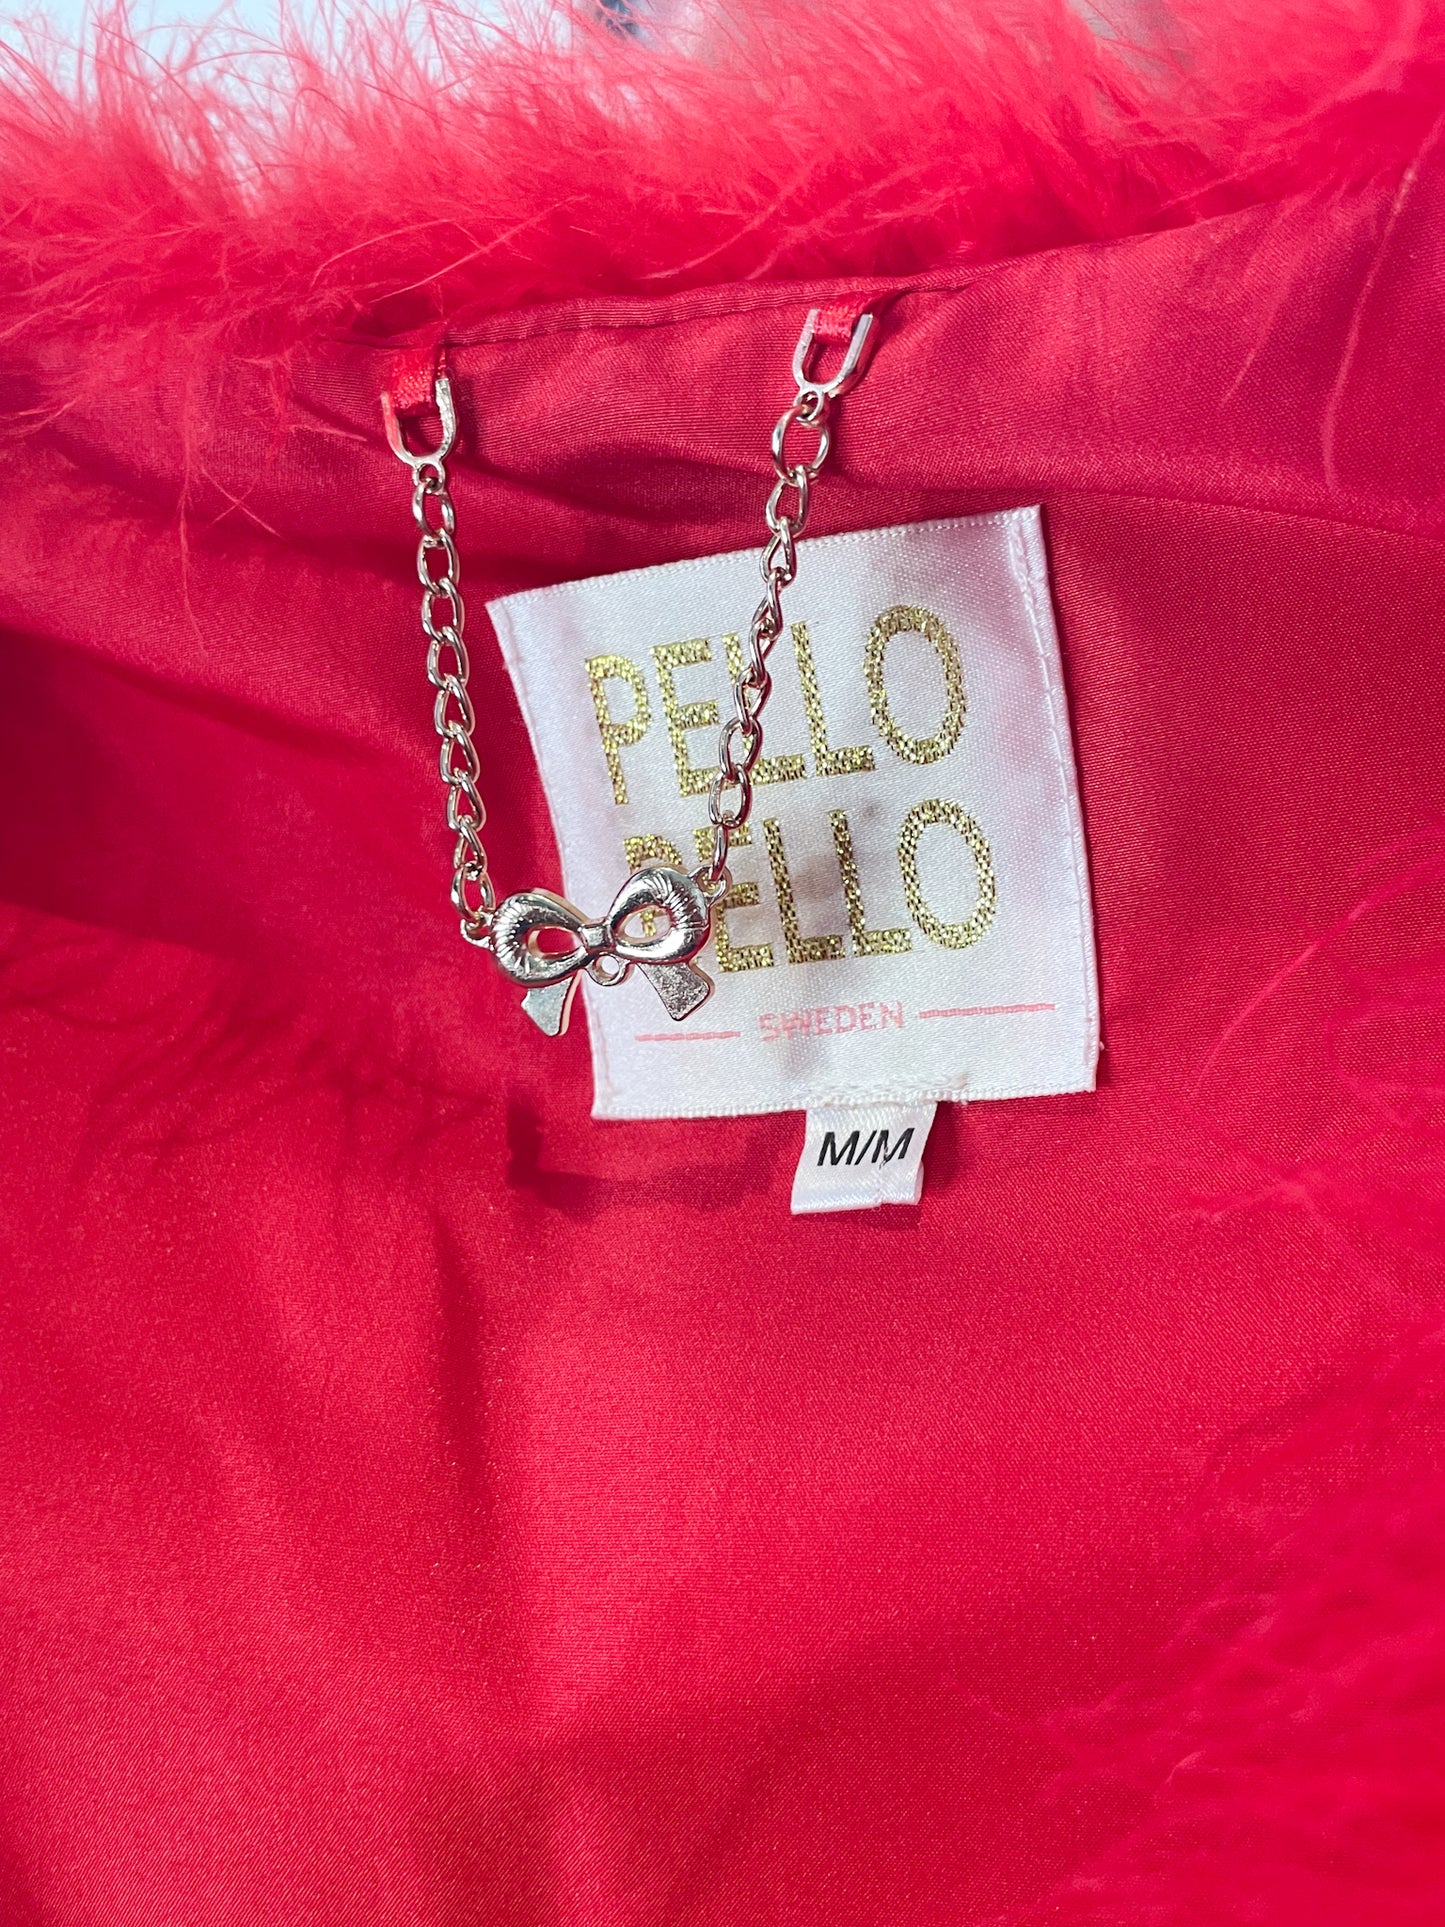 Pello Bello Red Real Feather Fluffy Statement Jacket - Medium (In-Store / Local KW Exclusive)